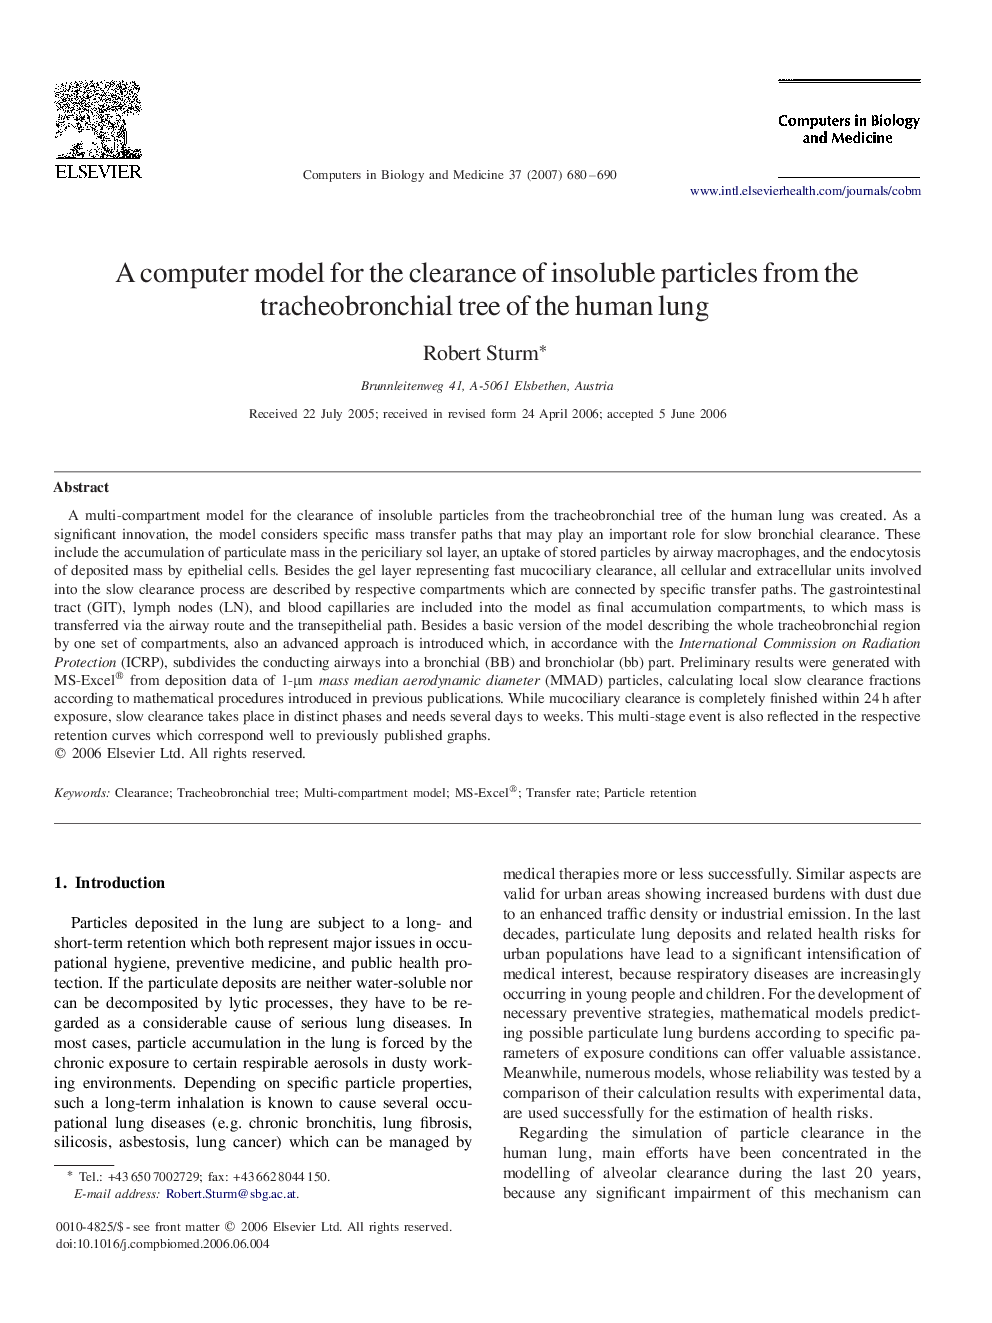 A computer model for the clearance of insoluble particles from the tracheobronchial tree of the human lung